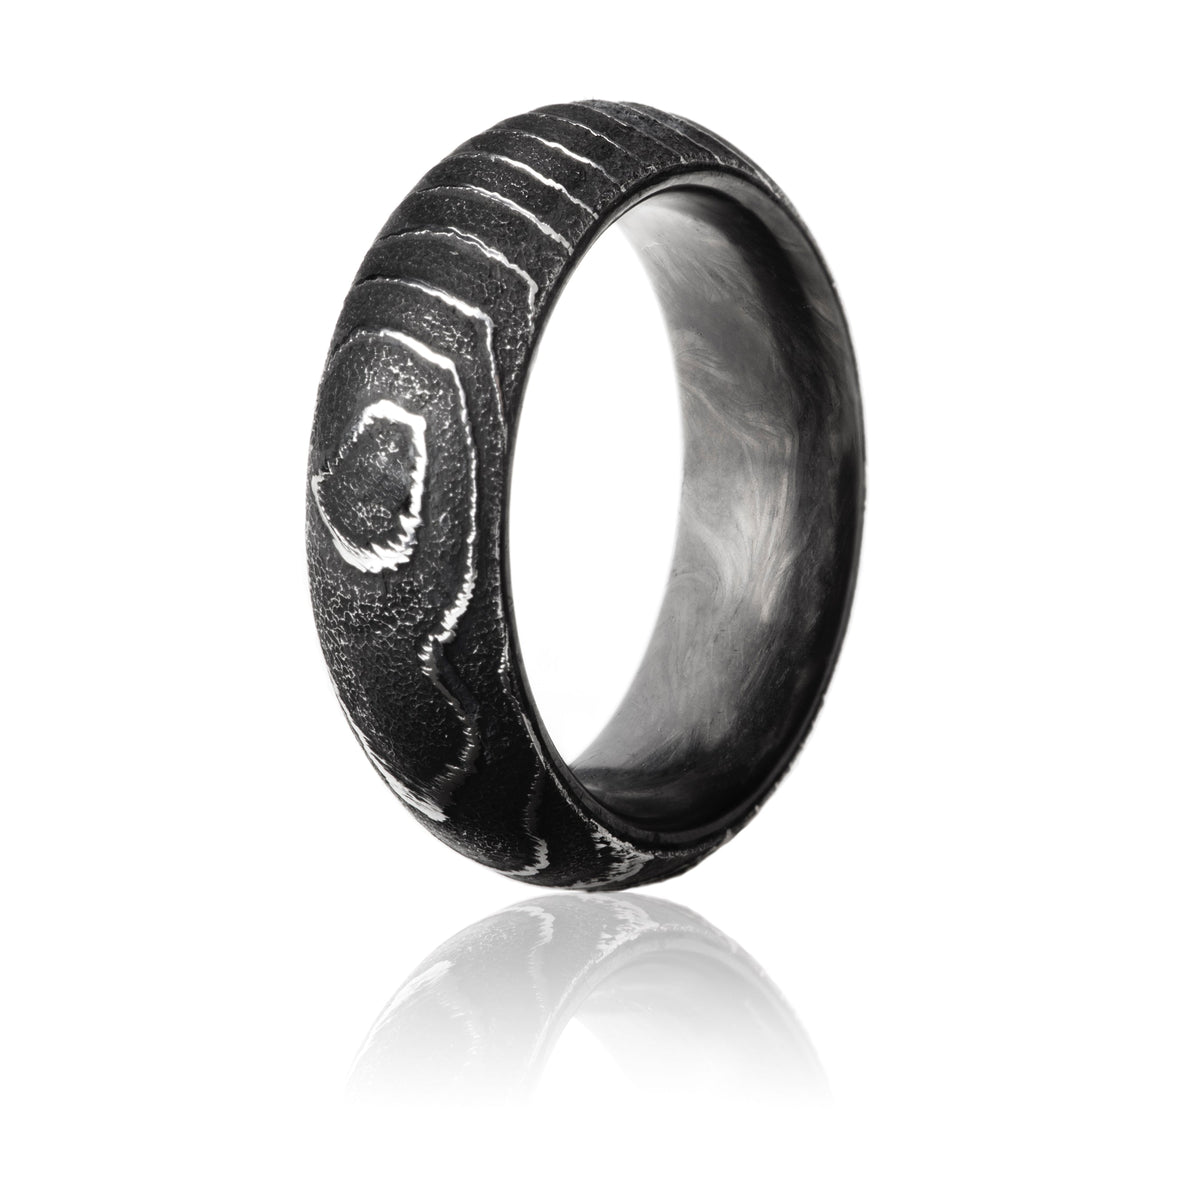 Damascus Steel ring with exterior scaly textured pattern and forged carbon fiber interior.